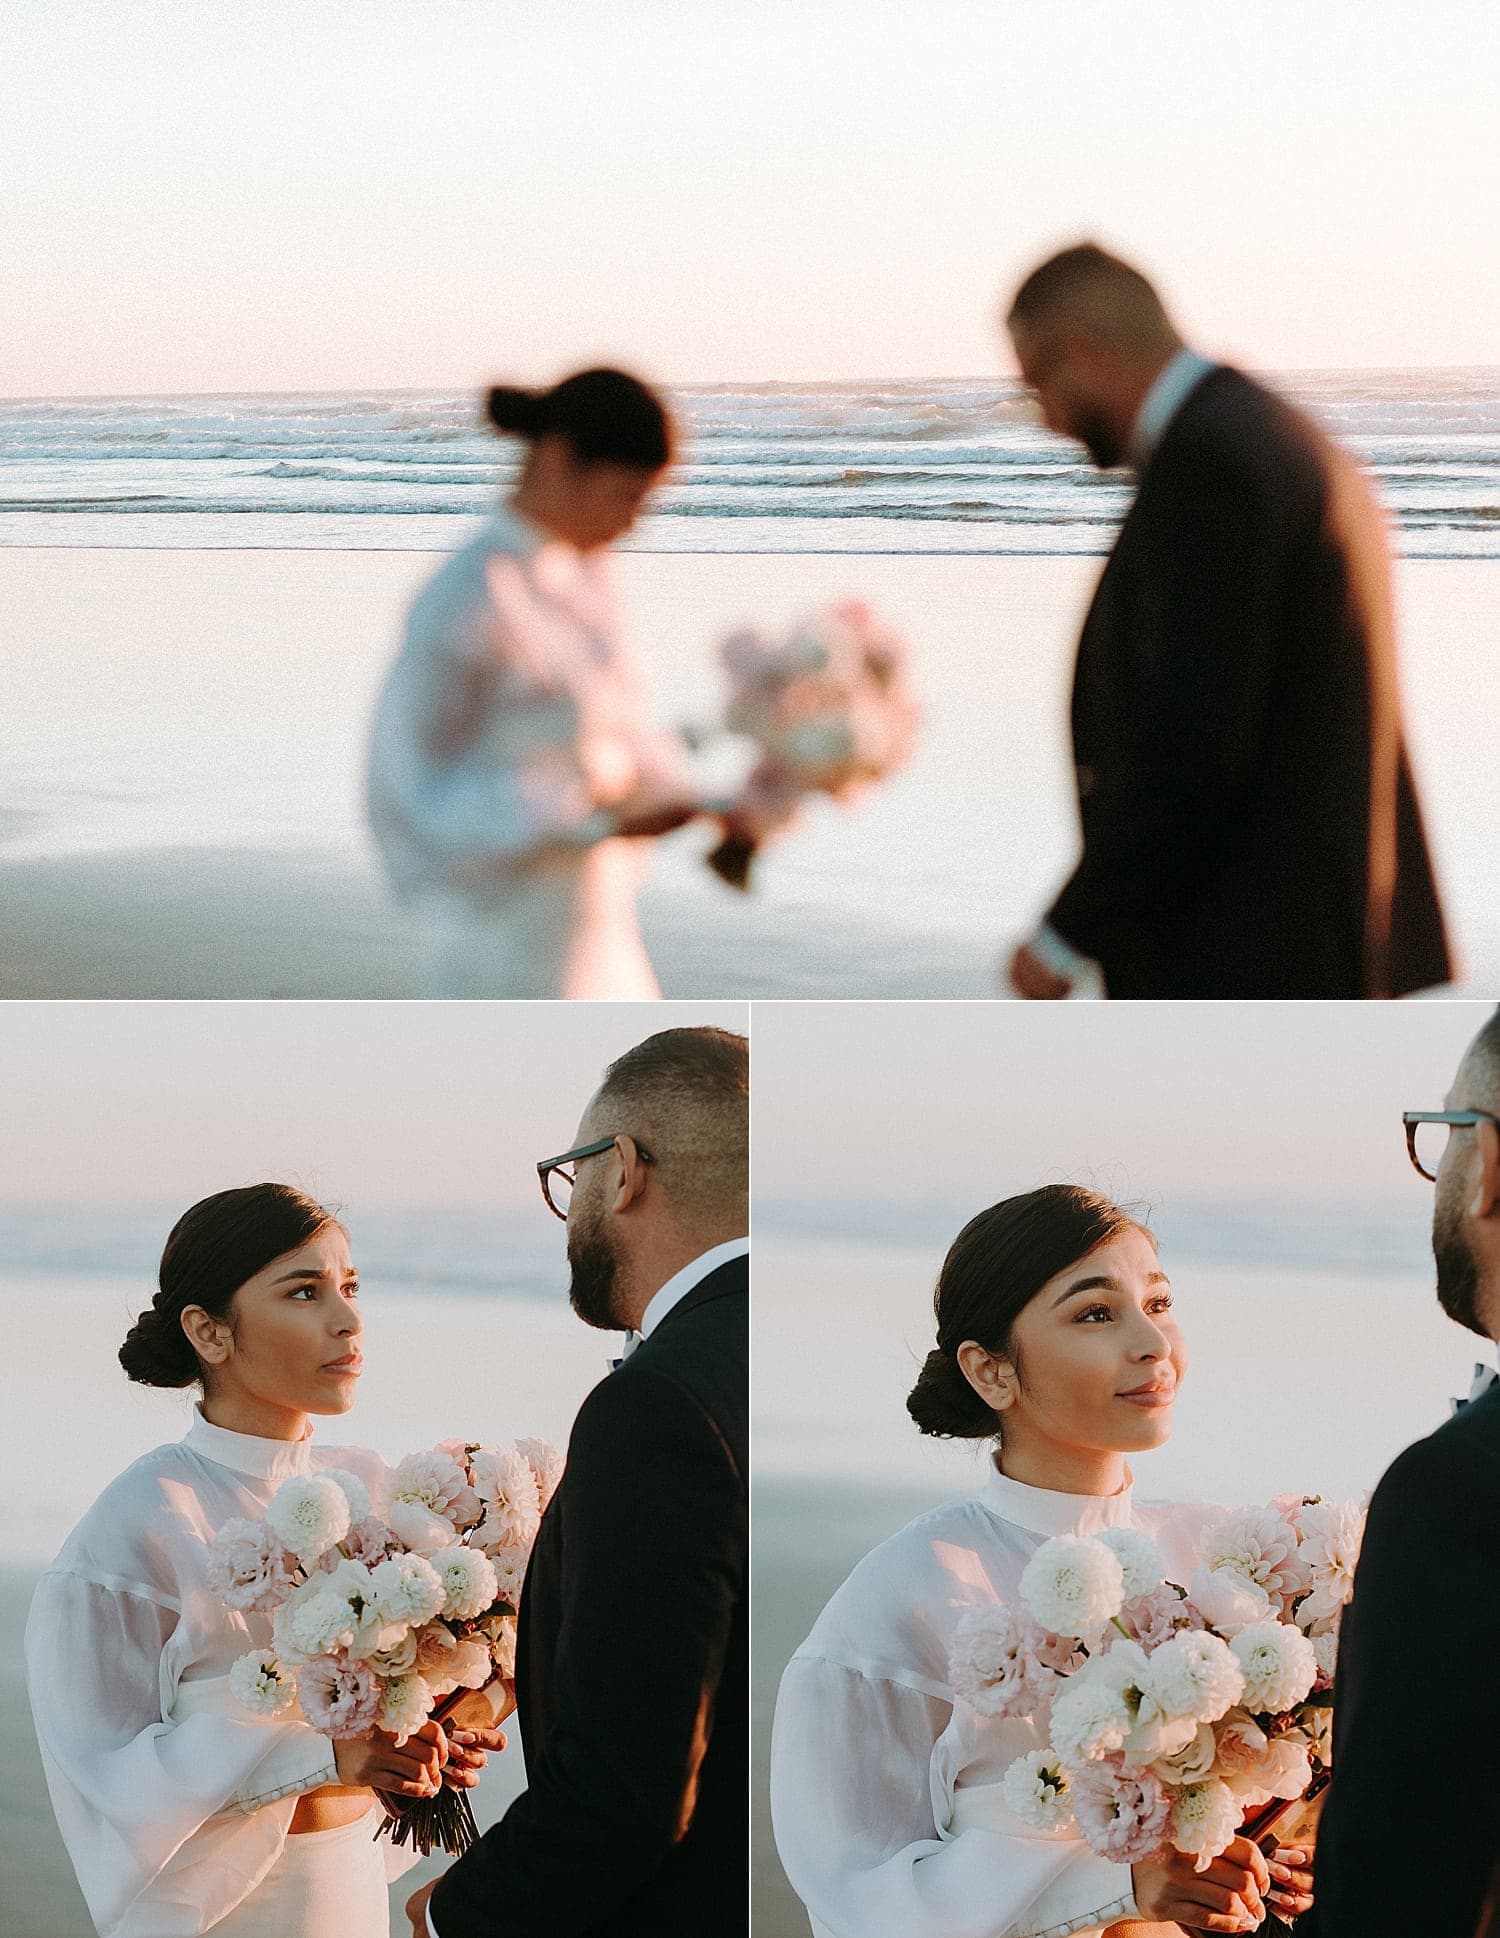 dreamy and emotional portraits of a bride on her wedding day cannon beach elopement captured by marcela pulido portland oregon wedding photographer